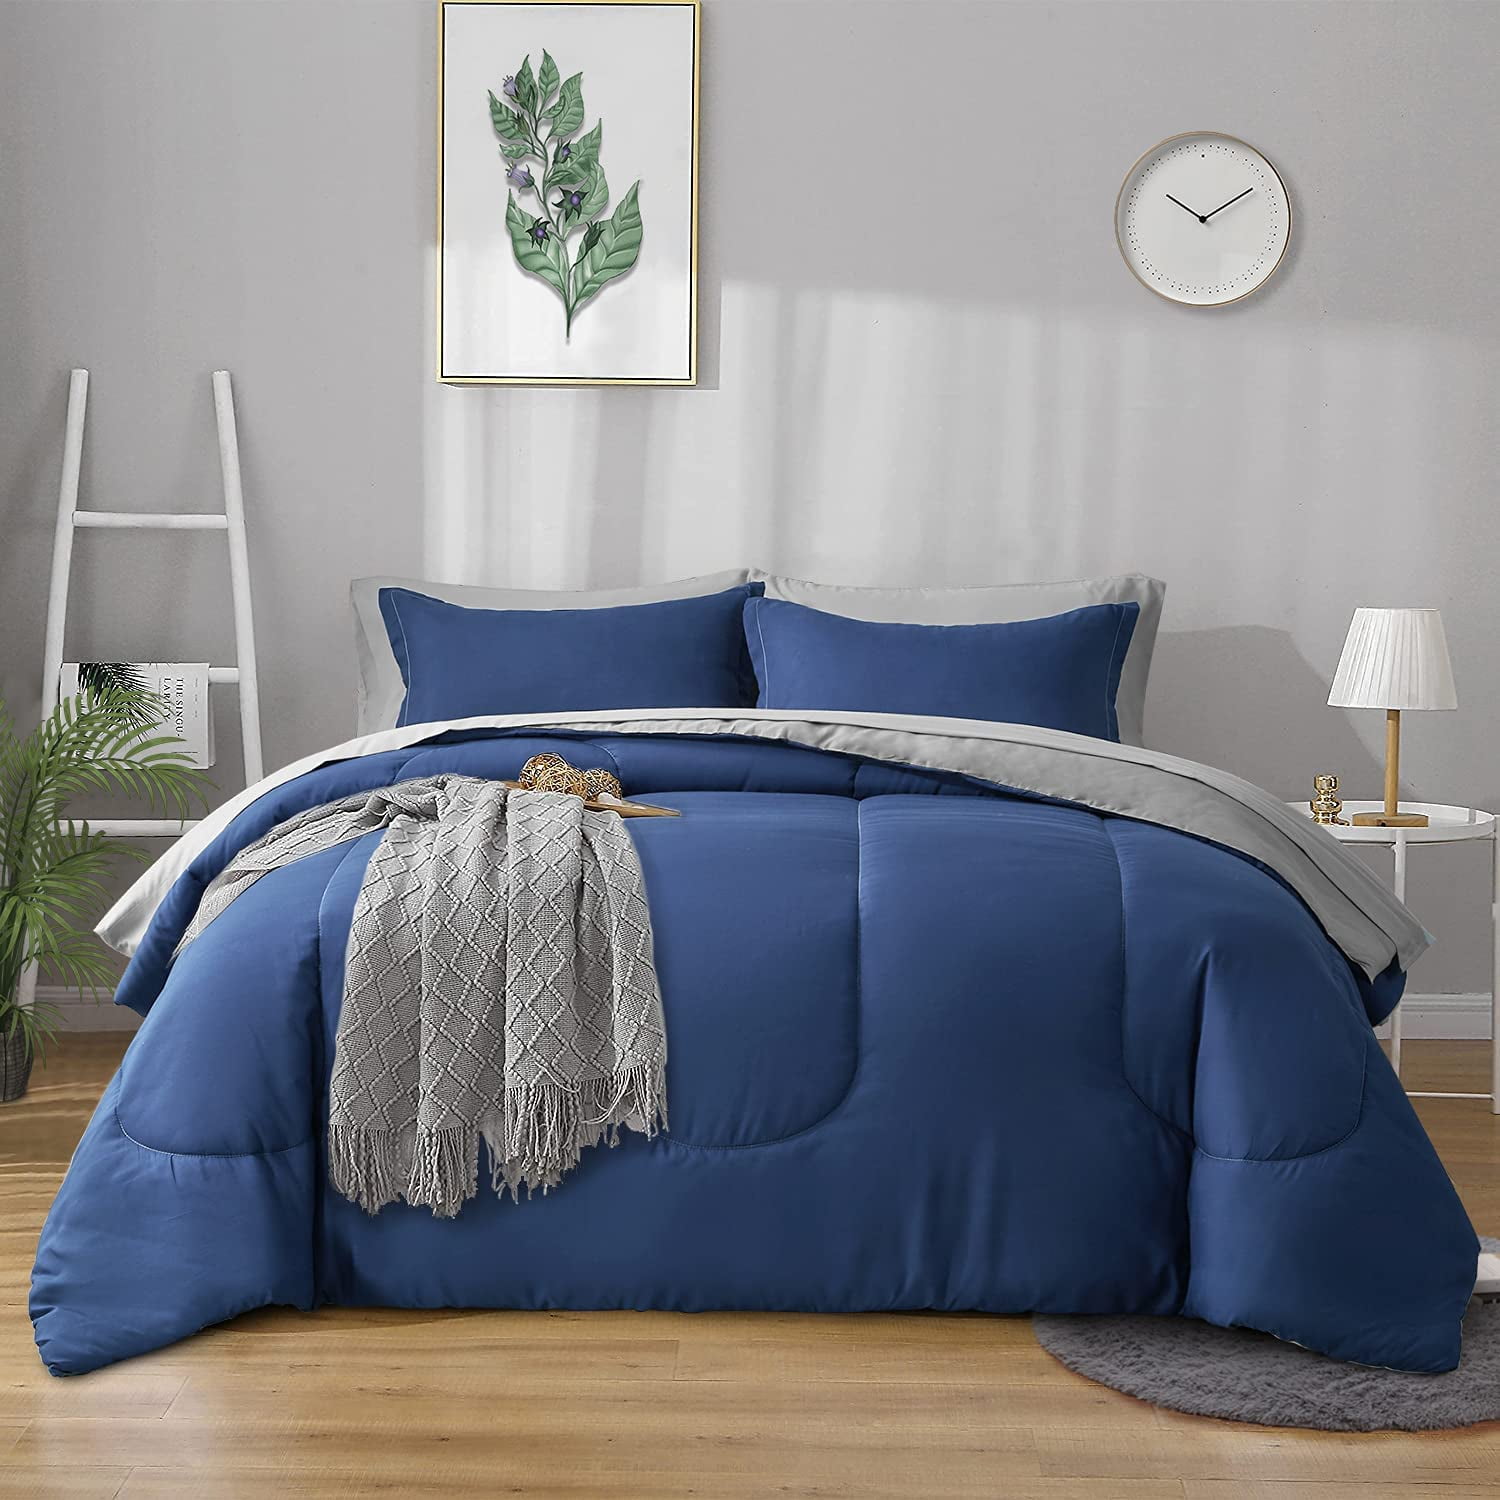 Uozzi Bedding Bed in a Bag 7 Pieces King Size 1 Comforter, 2 Pillow Shams, 1 Flat Sheet, 1 Fitted Sheet, 2 Pillowcases Soft Microfiber Reversible Bed Comforter Set Blue Gray/White Blue Stripes